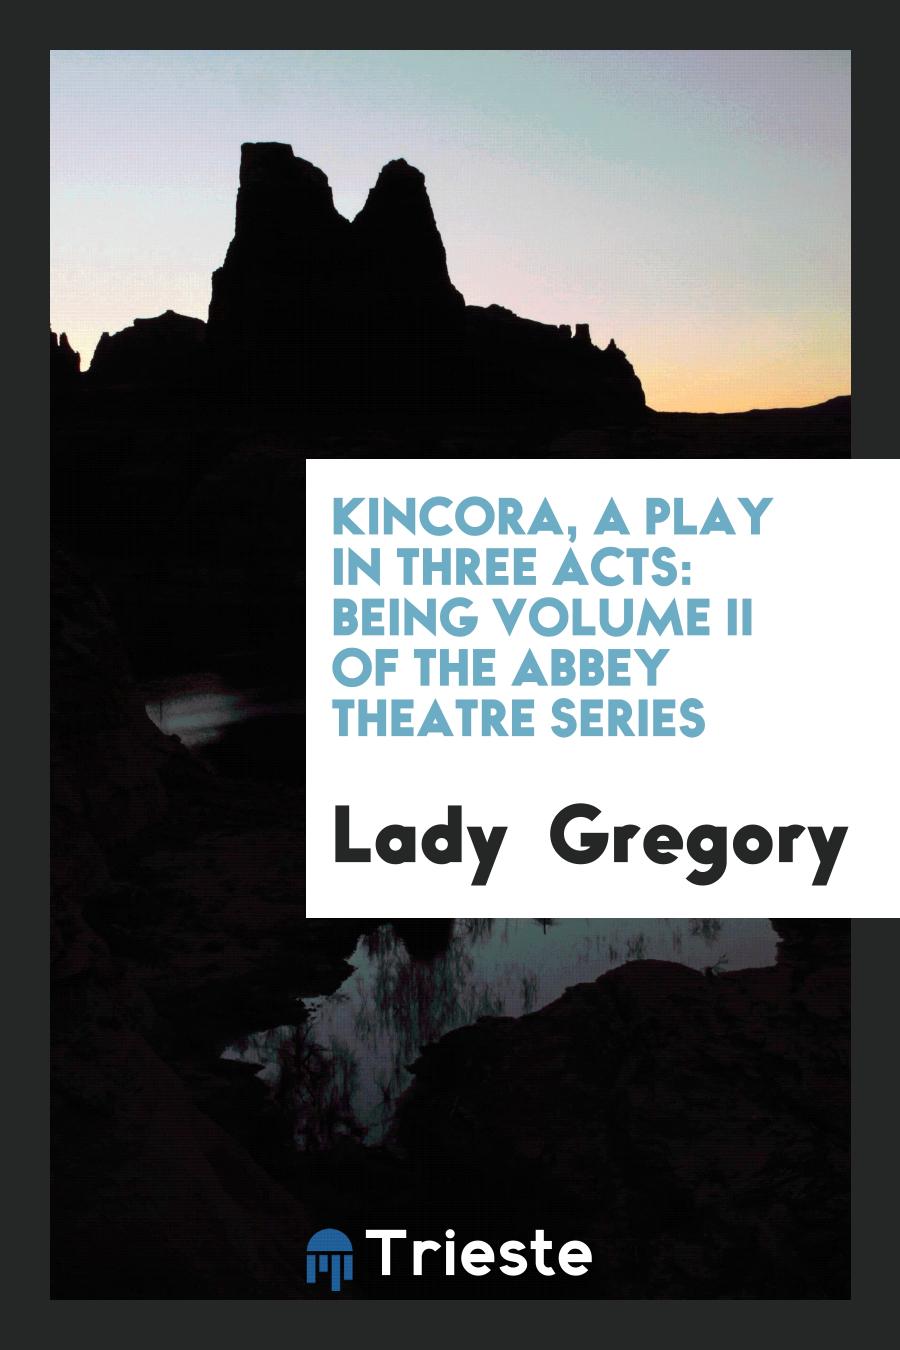 Kincora, A Play in Three Acts: Being volume II of the Abbey theatre series